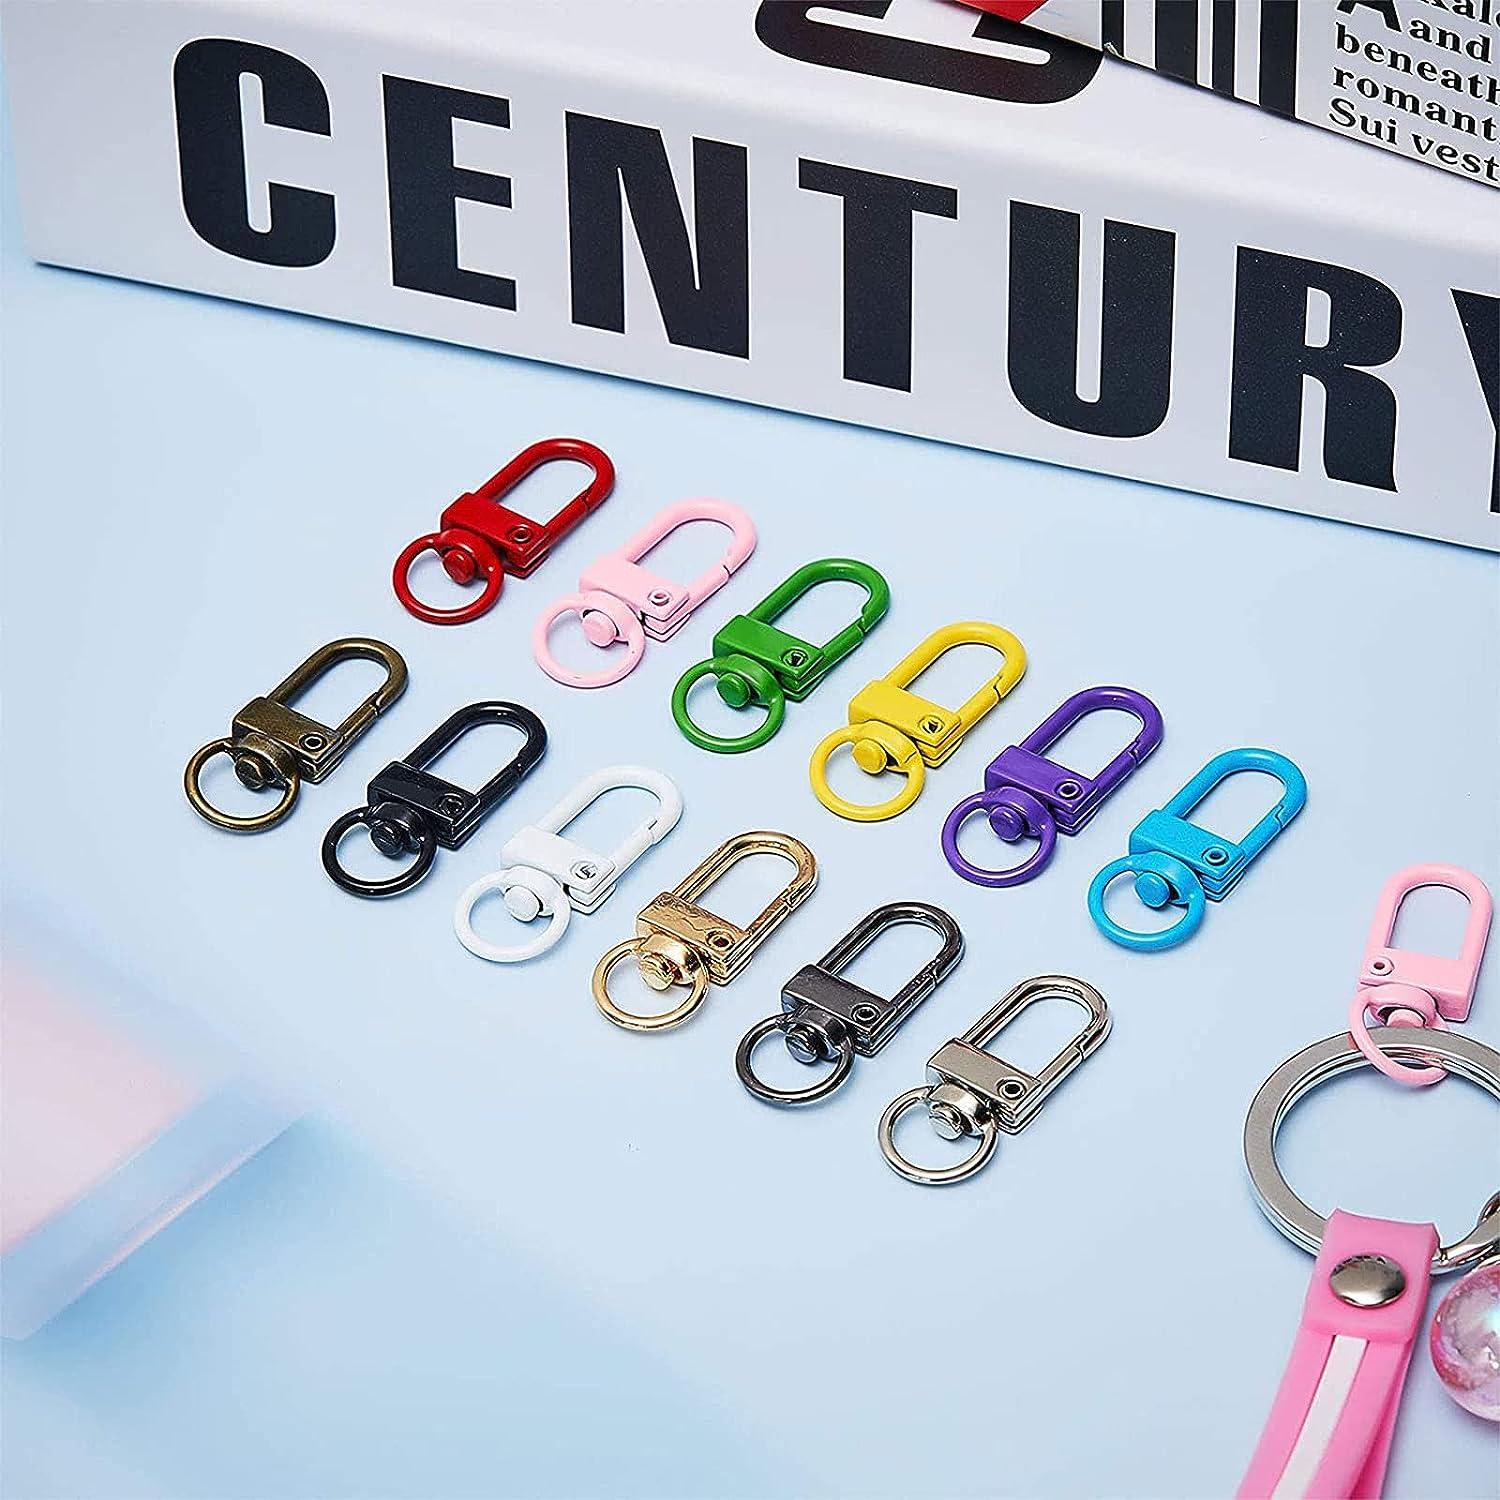 Colorful Metal Lobster Claw Clasps Swivel Lanyards Trigger Snap